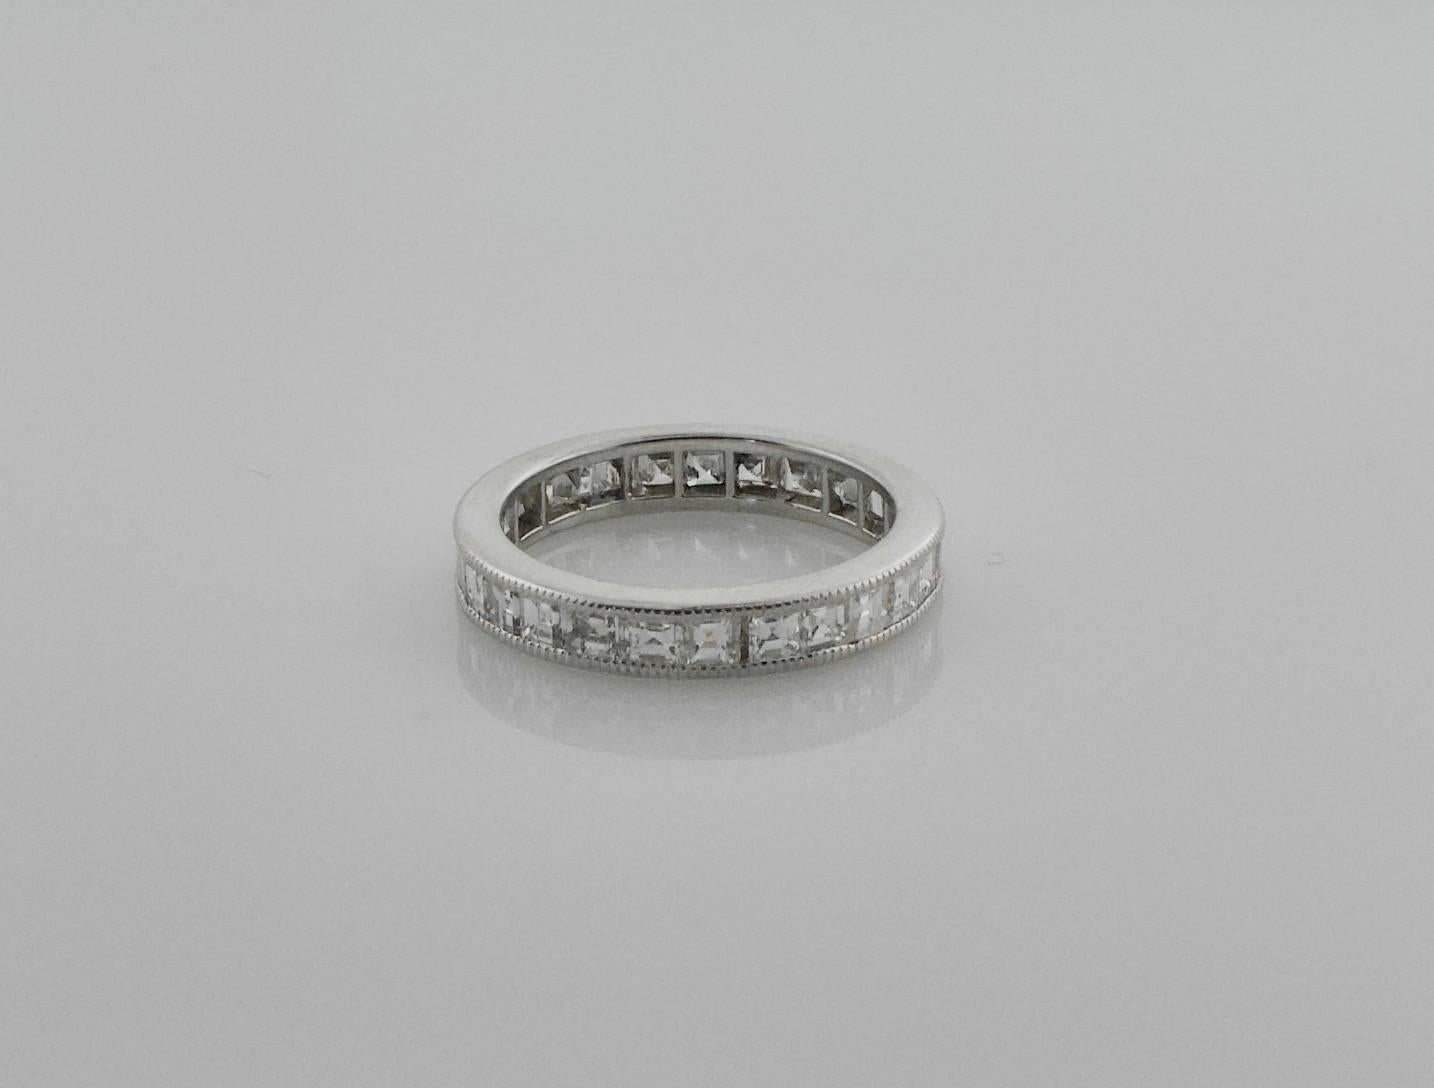 Square Cut Diamond Eternity Ring in White Gold
Twenty Seven Square Cut Diamonds weighing 2.45 carats approximately GH VVS-VS1 [fine quality]
Size 6 1/4
Beautifully Made.  